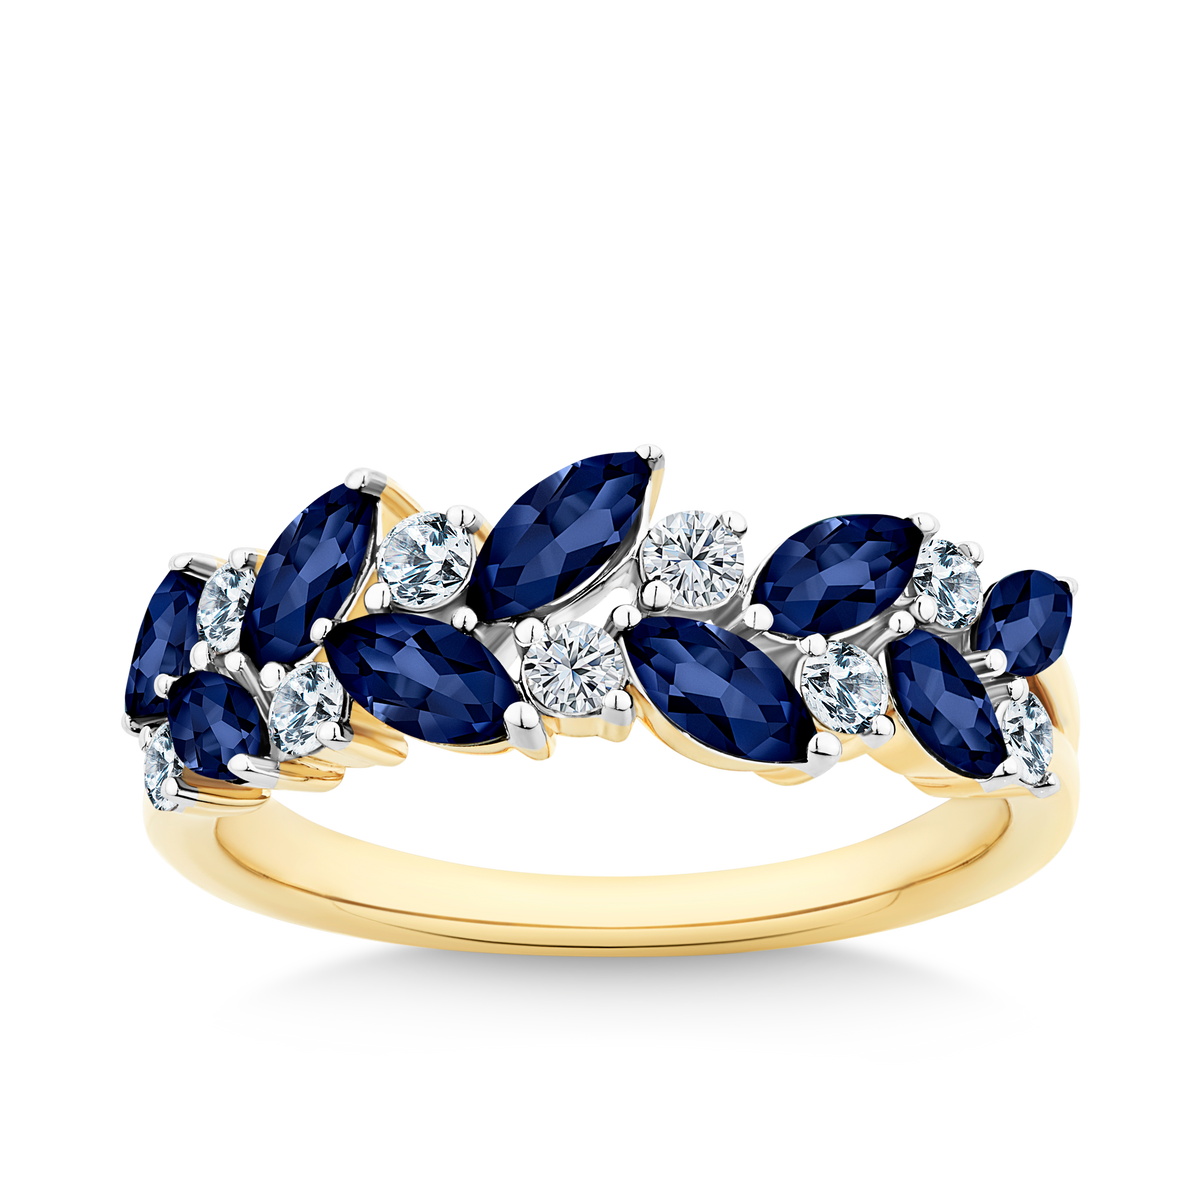 Sapphire & 2.09ct TW Diamond Cluster Dress Ring in 9ct Yellow Gold